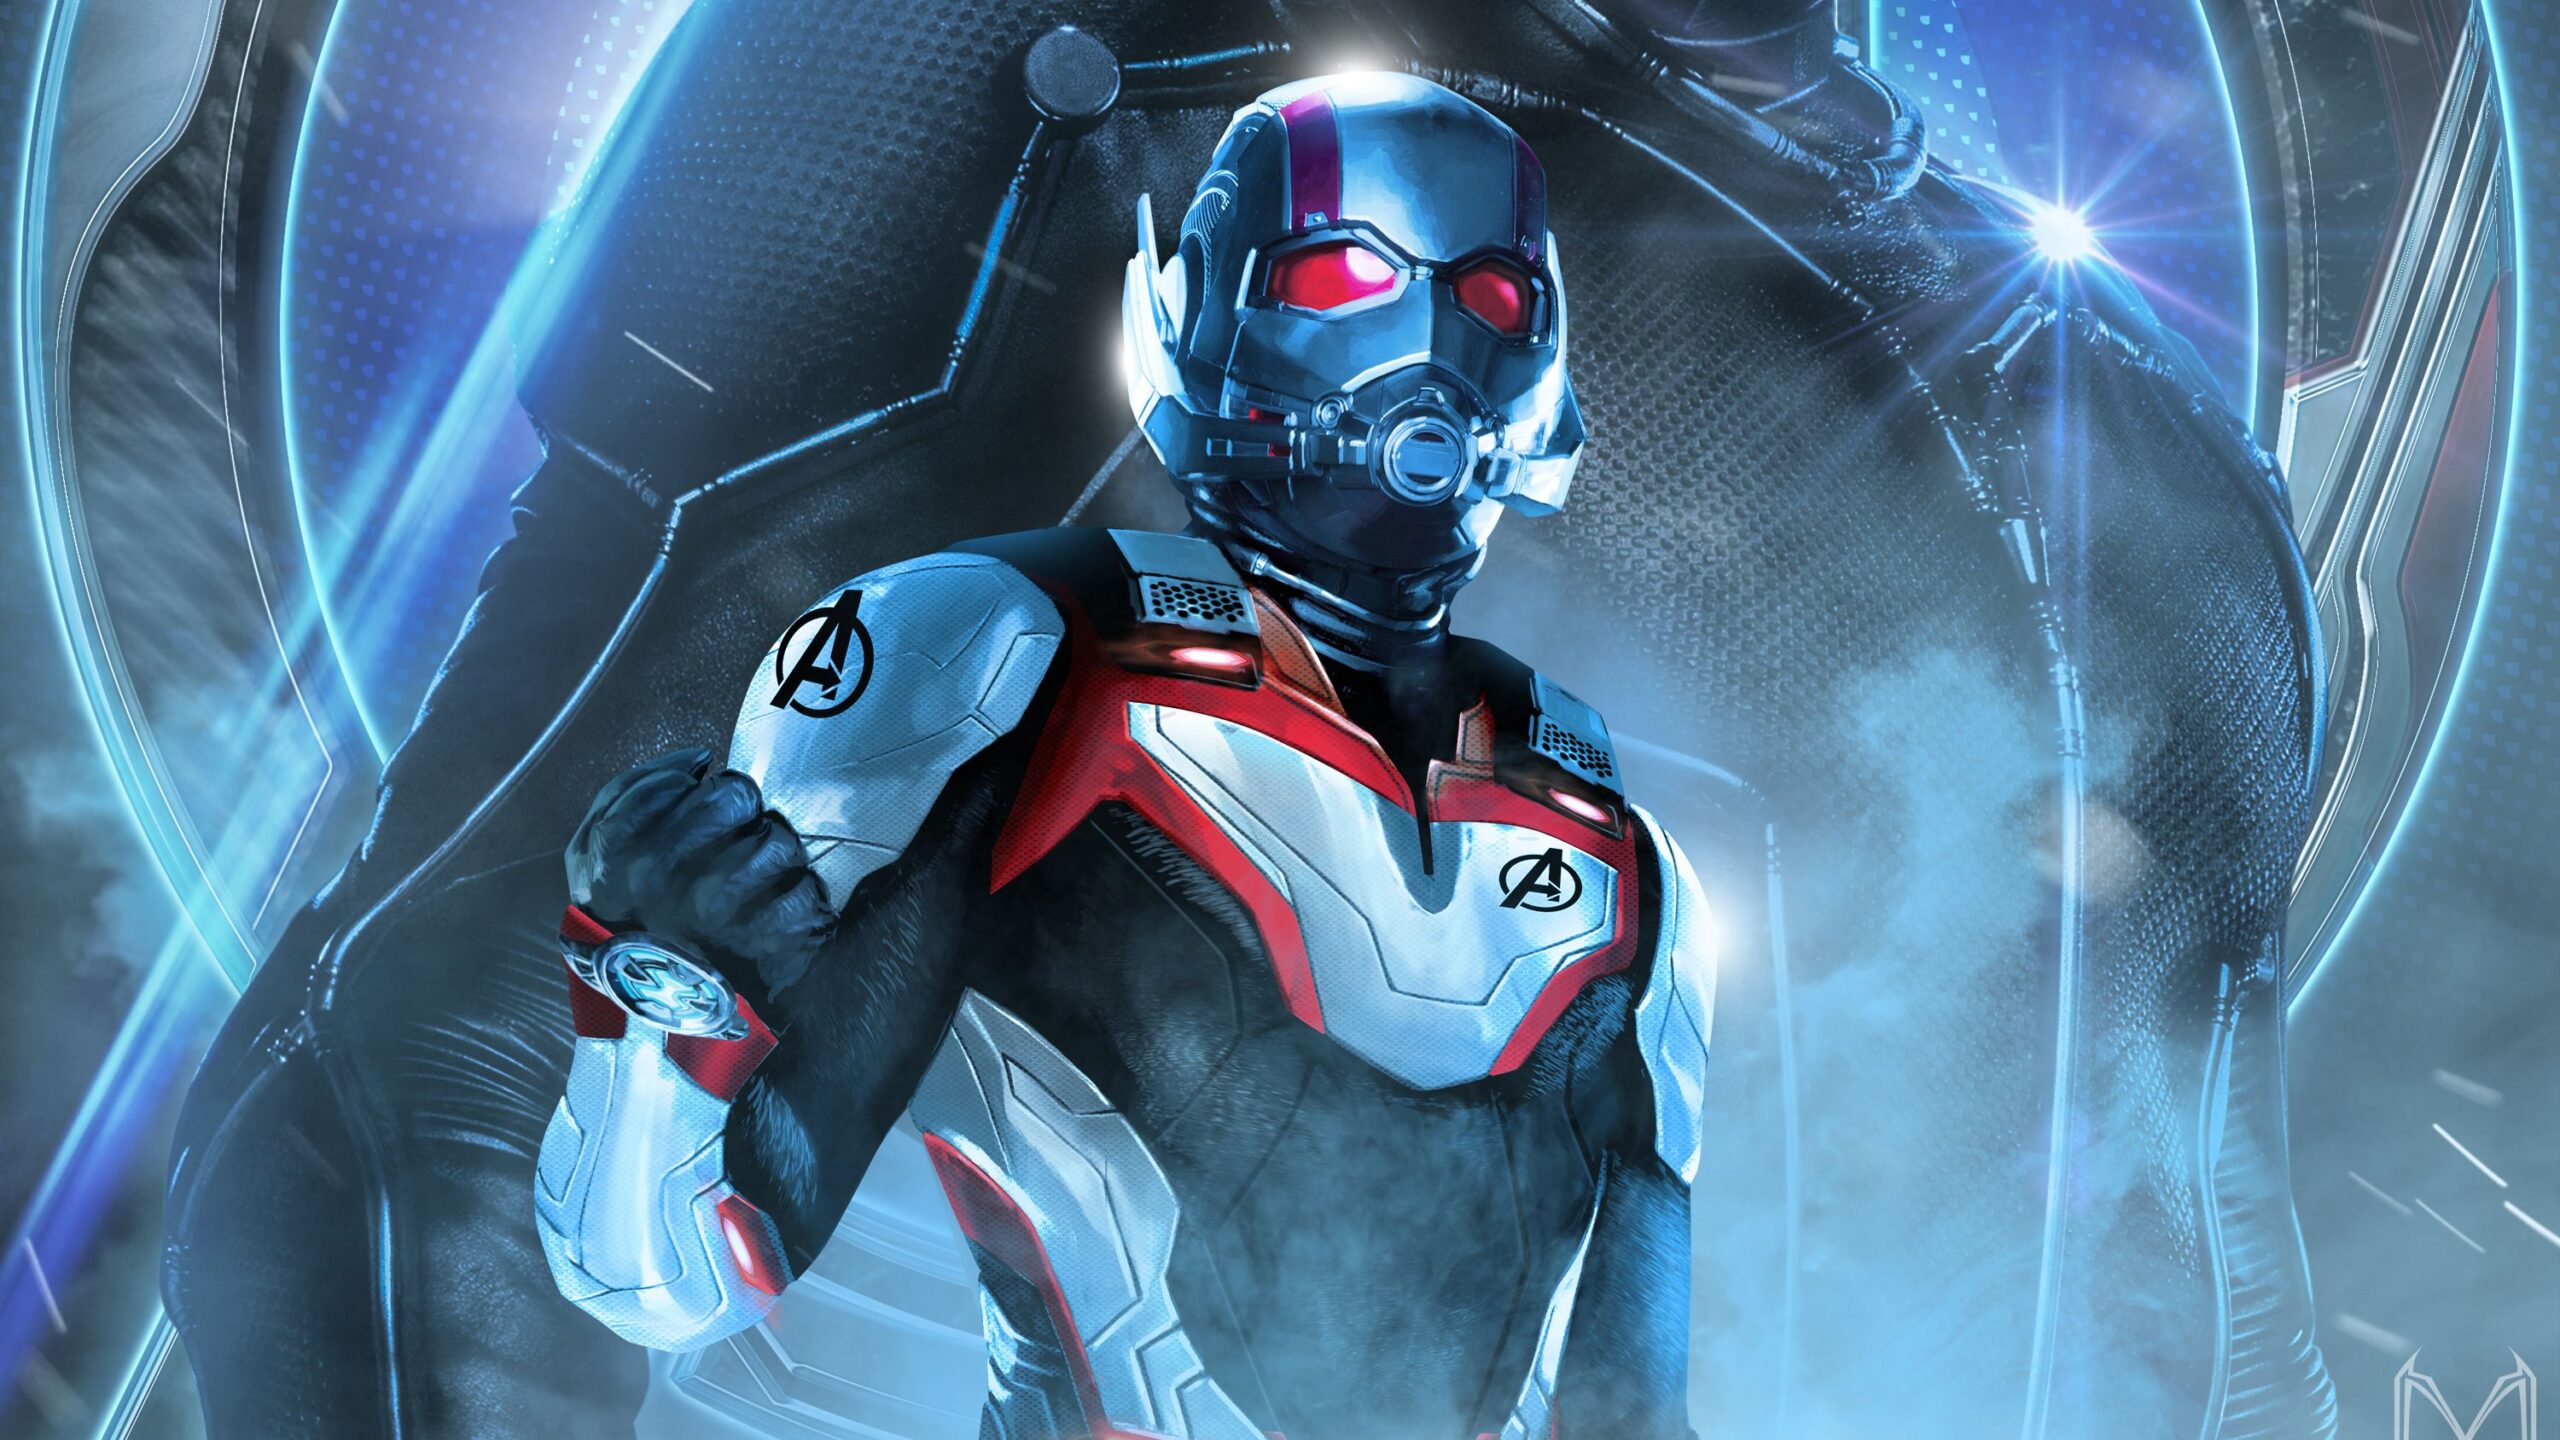 Ant-Man opens big at box office with $104M for 'Quantumania' 